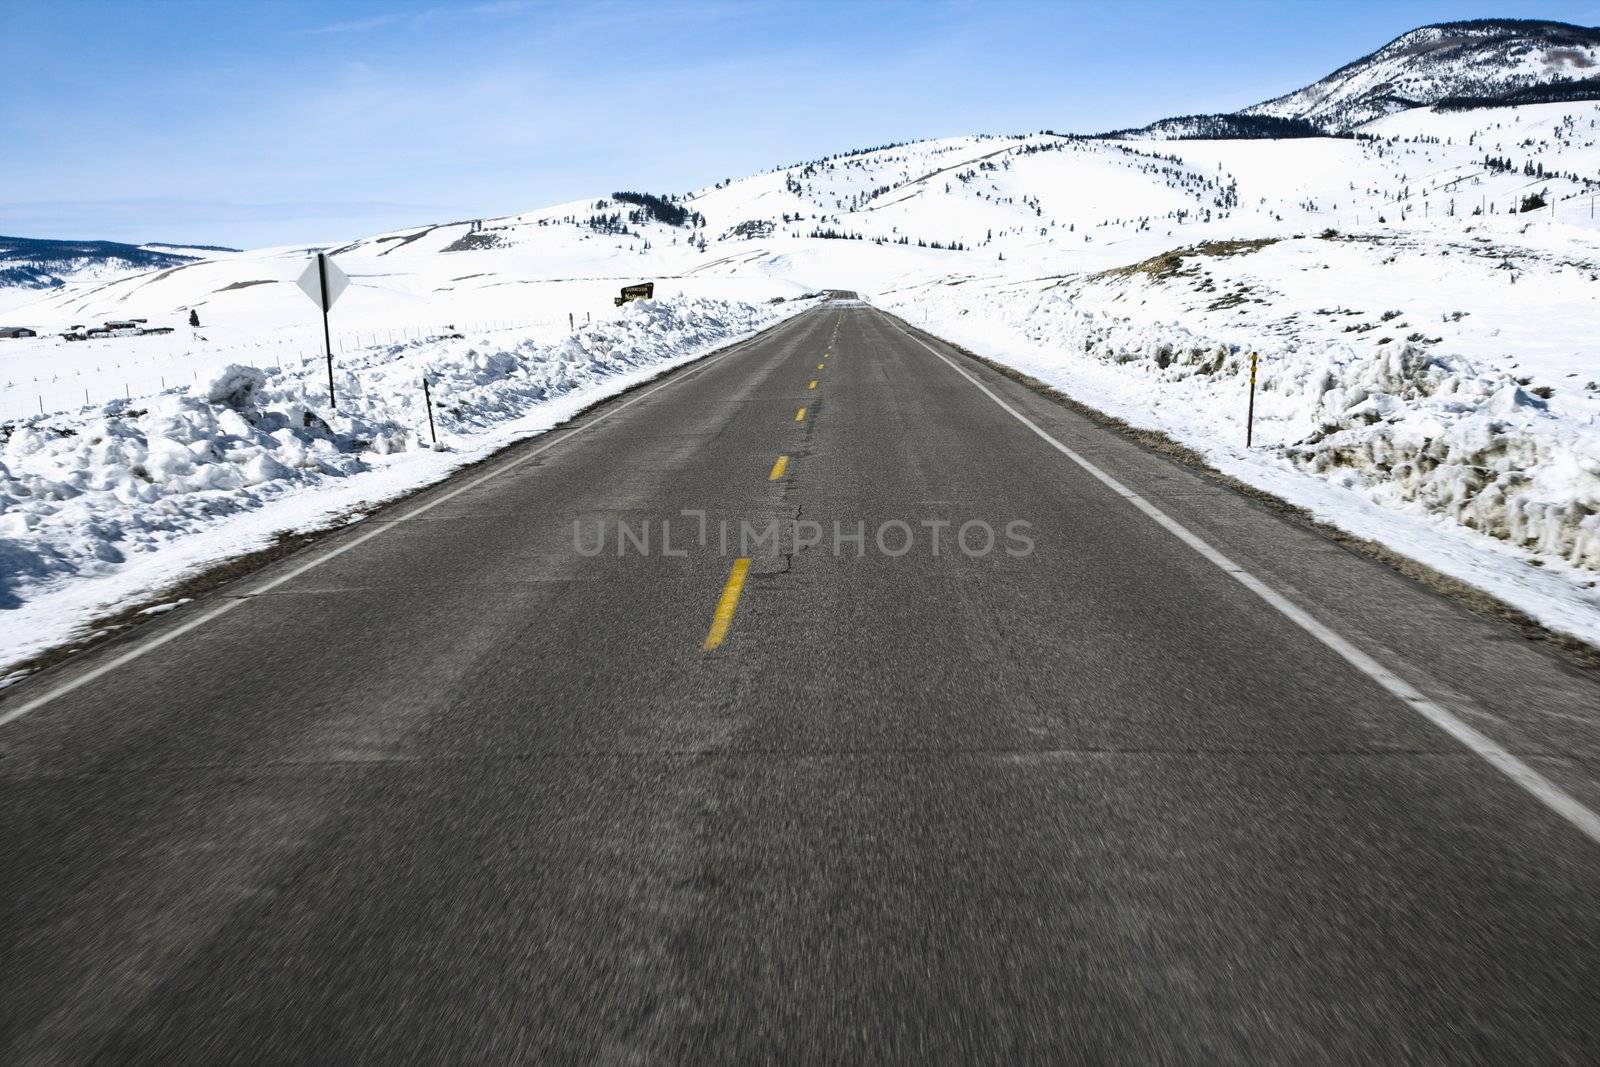 Perspective shot of road in snowy Colorado during winter.